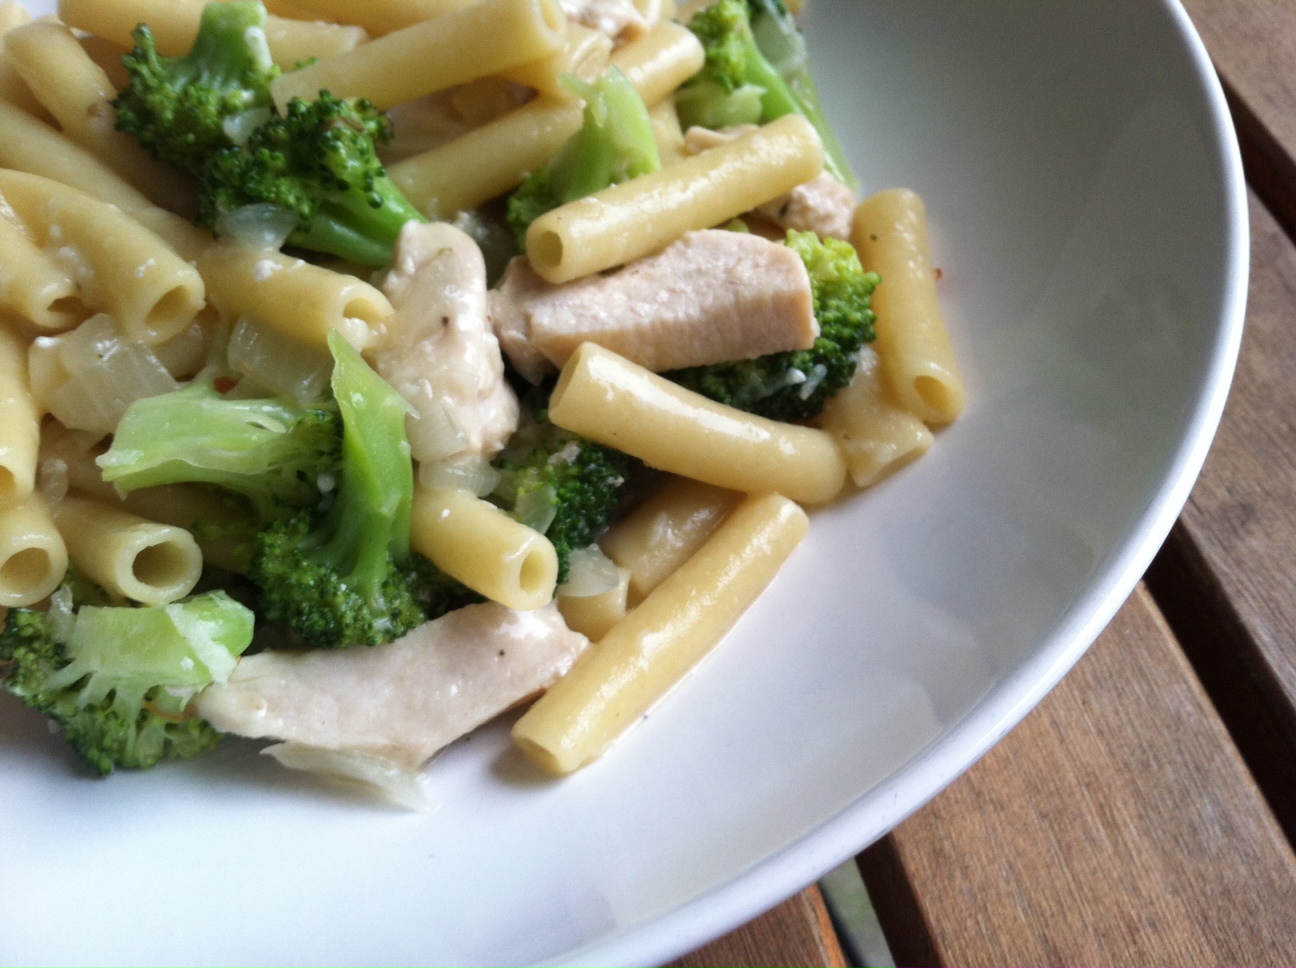 A Taste of Home Cooking: Skillet Penne with Chicken and Broccoli